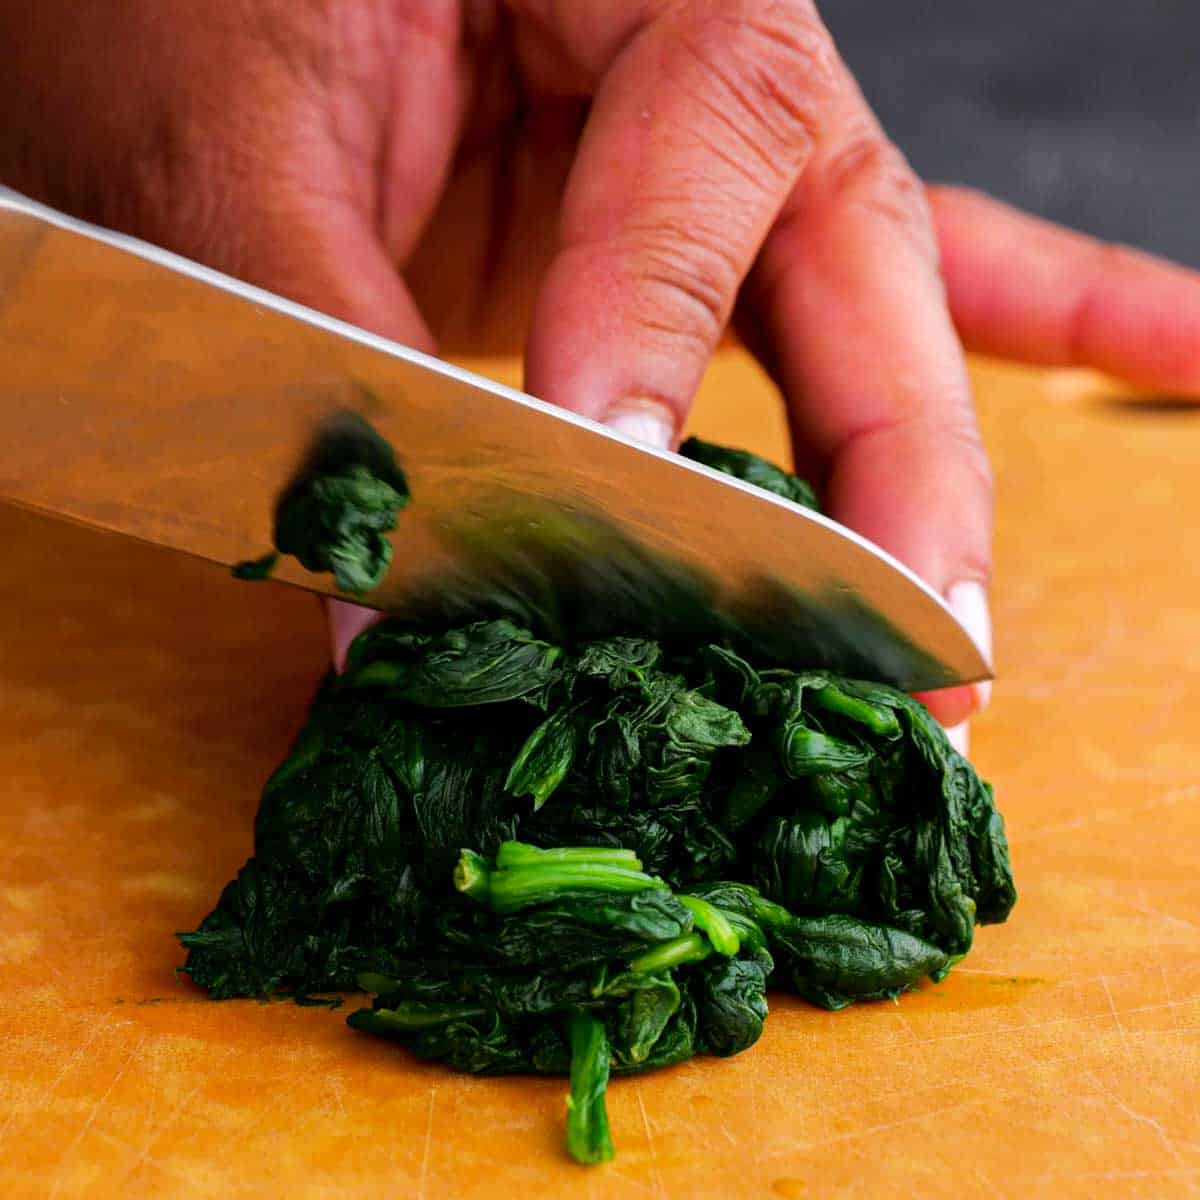 chopping up steamed spinach for Stuffed Shells